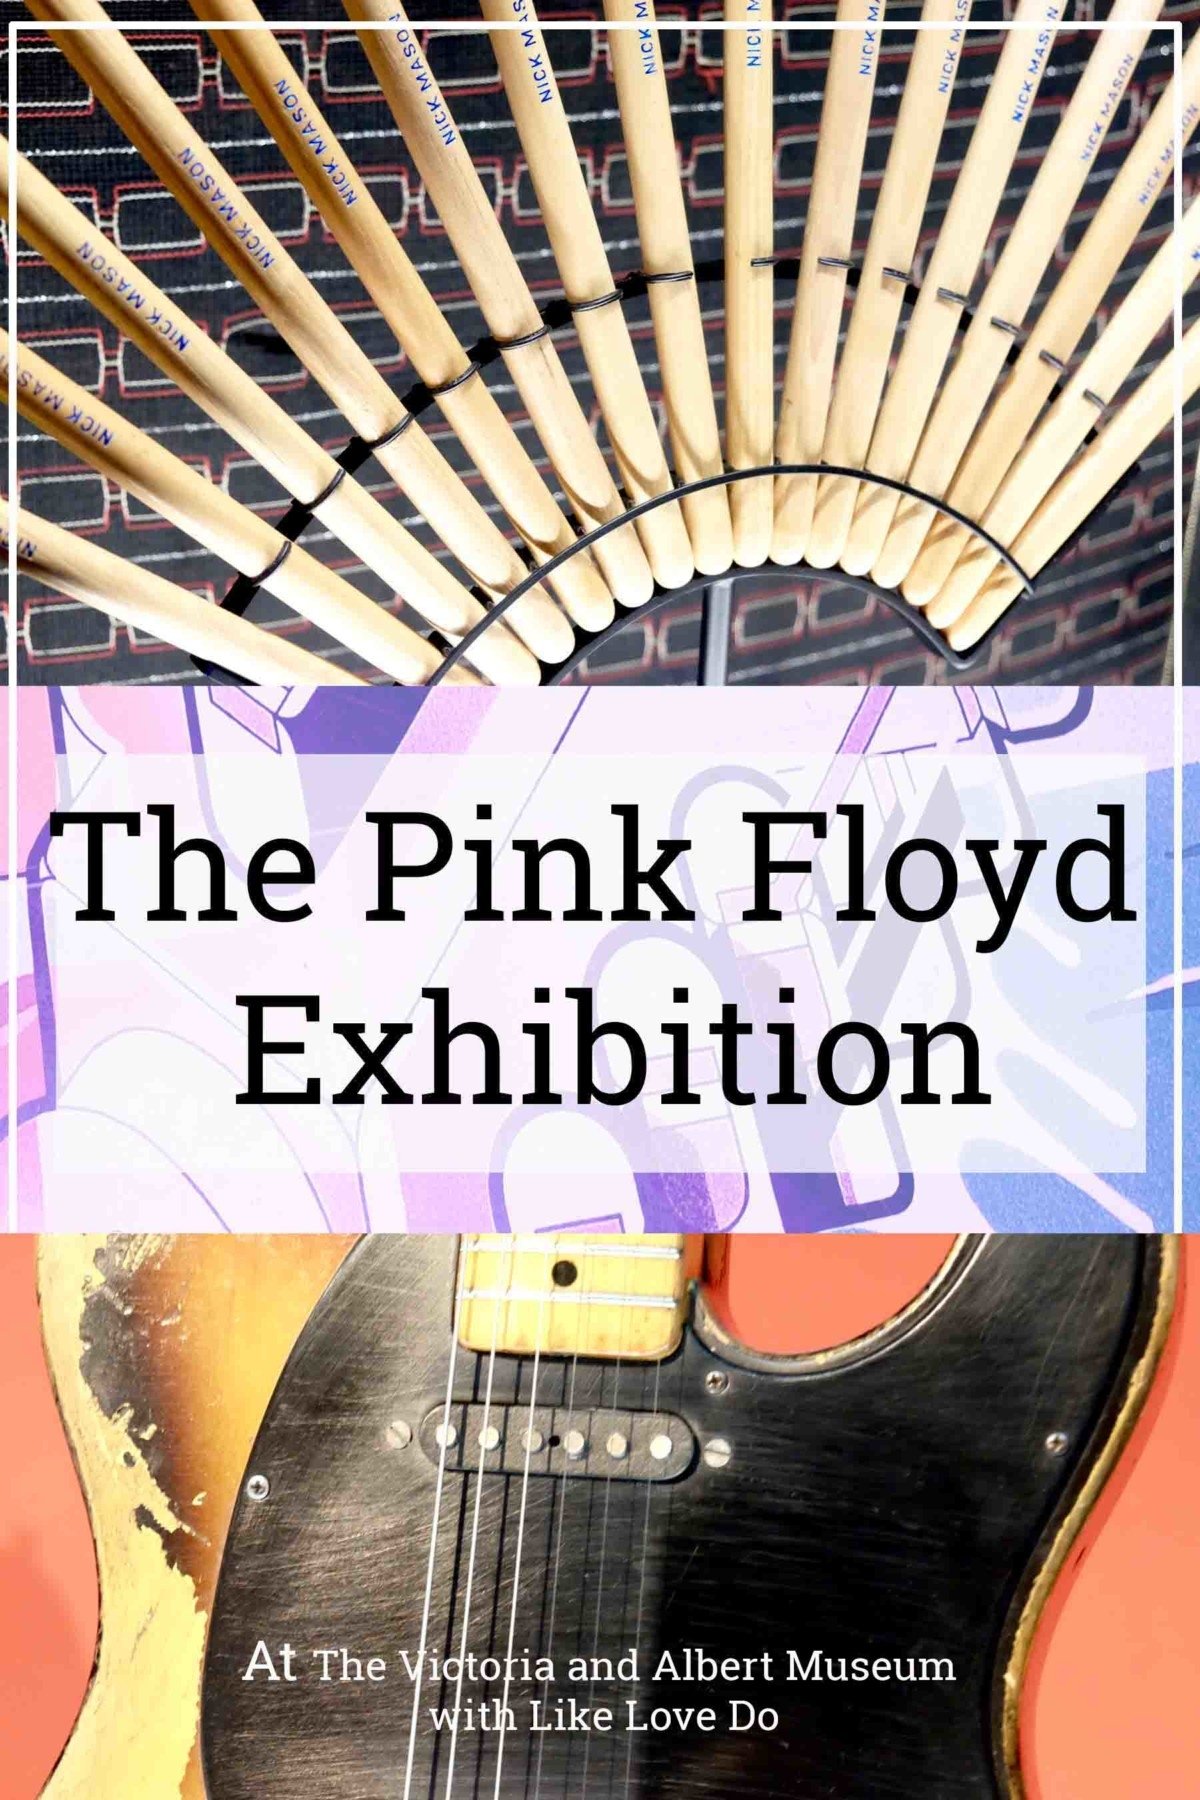 The Pink Floyd Exhibition at the Victoria and Albert Museum